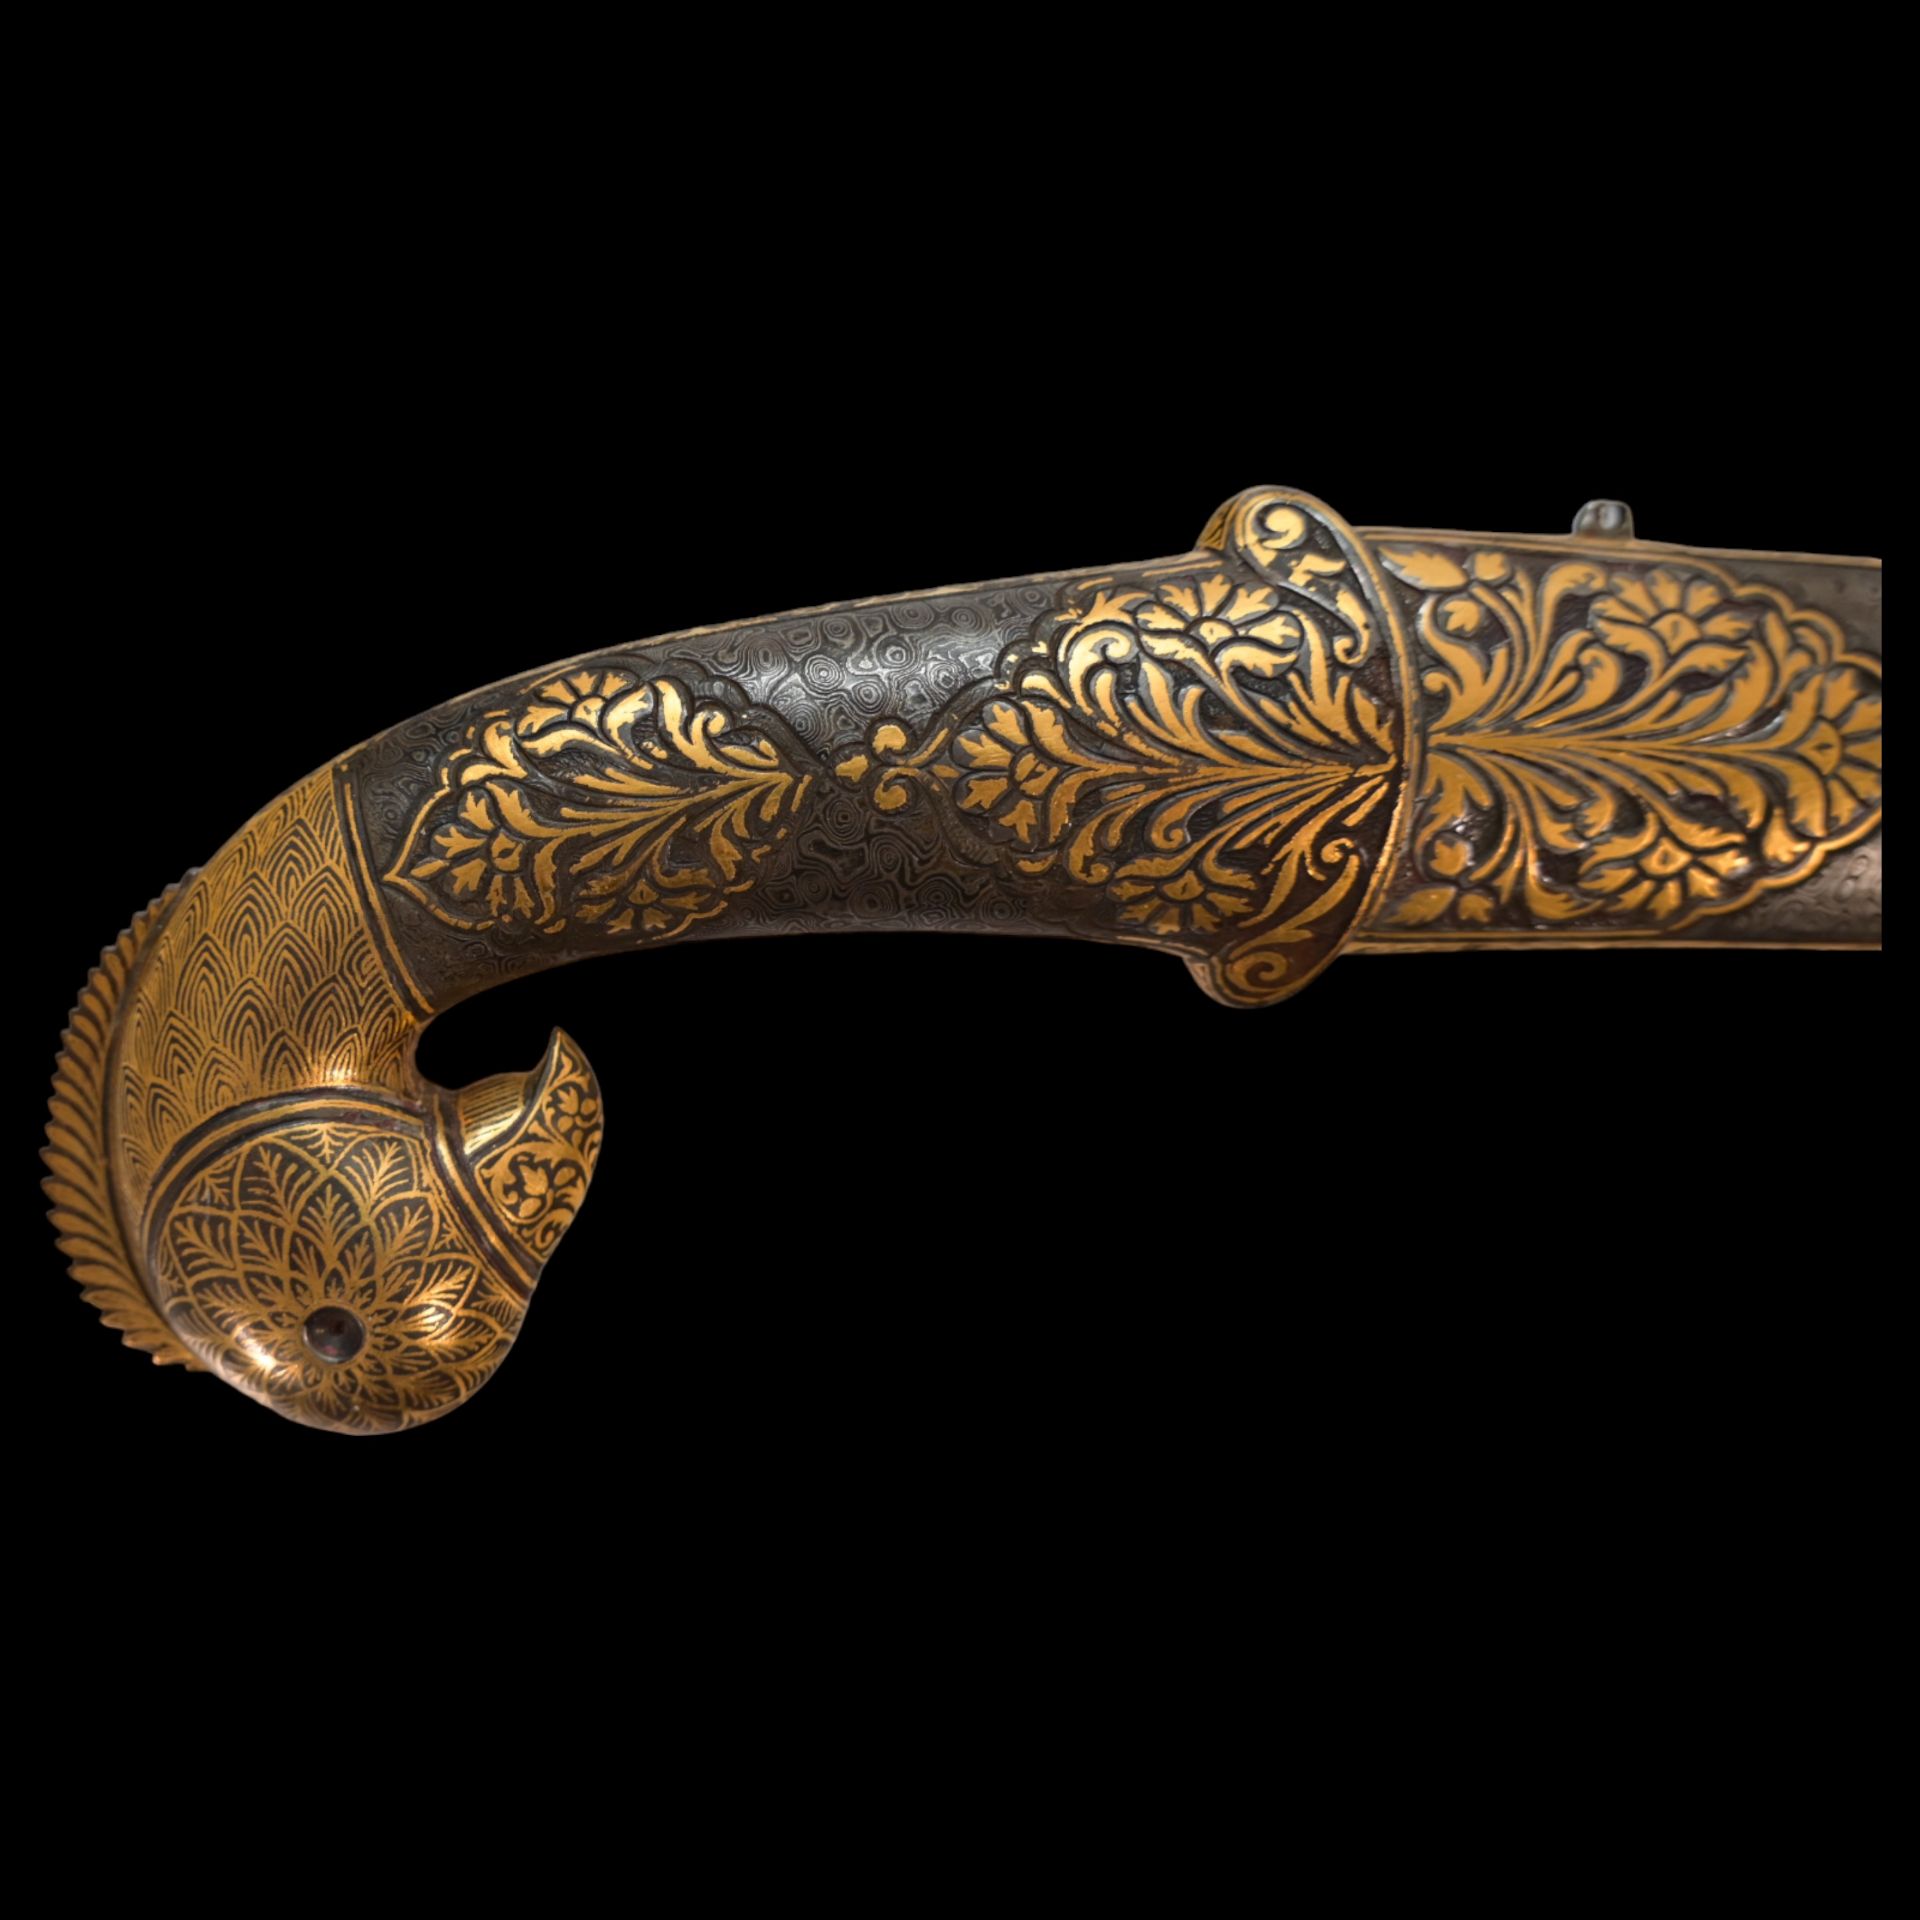 Richly decorated gold kofgari Indian dagger with wootz blade, 19th century. - Image 7 of 12